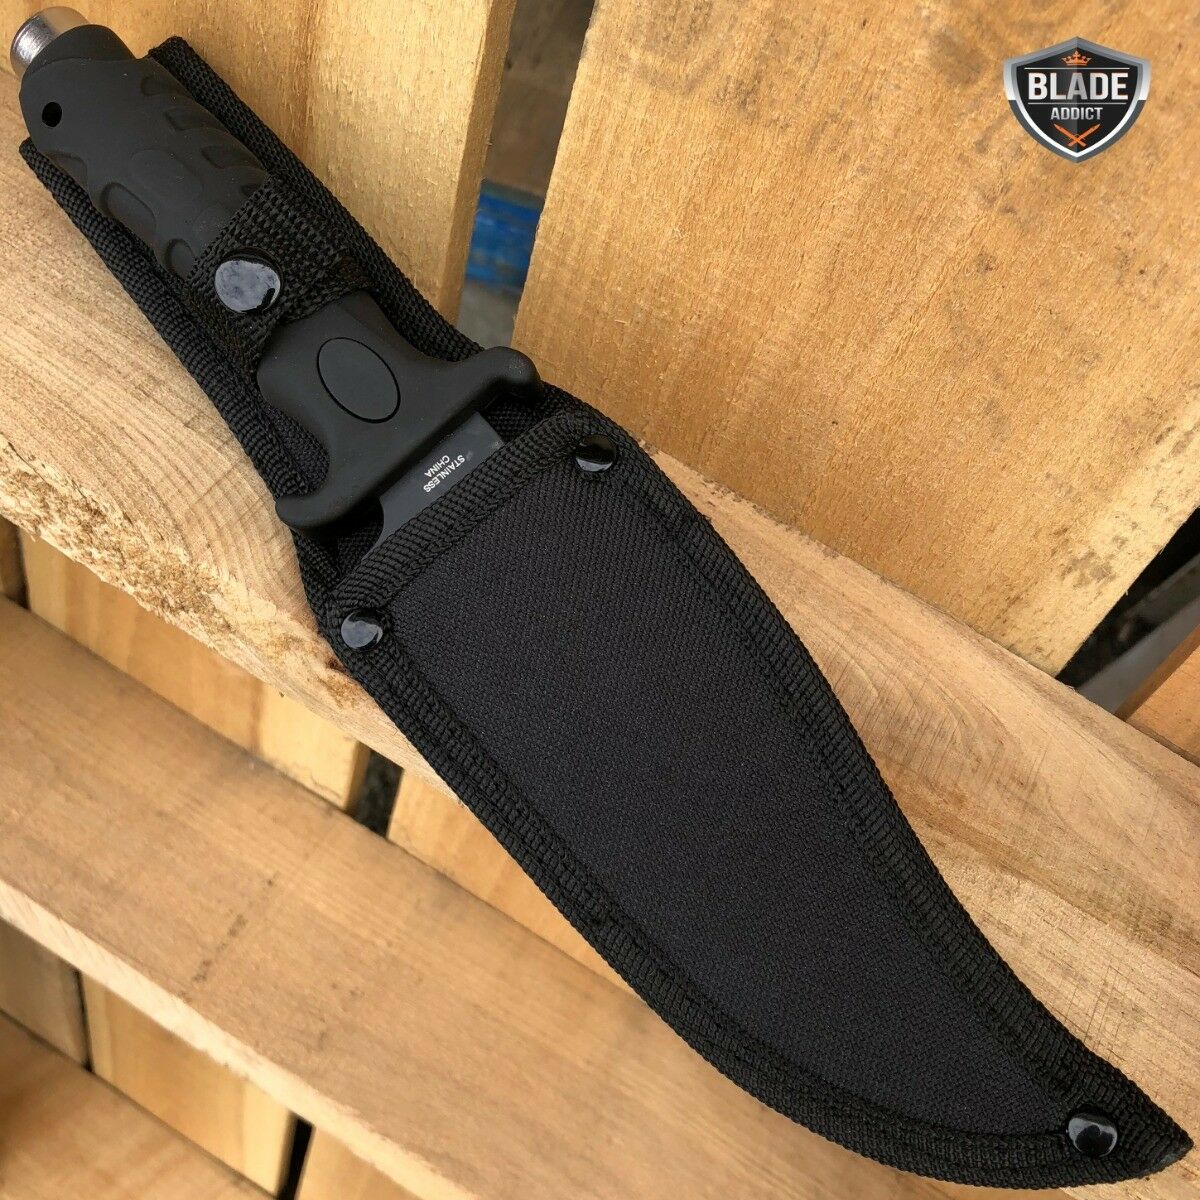 11" TACTICAL BOWIE SURVIVAL HUNTING KNIFE w/ Sheath Fishing military 9